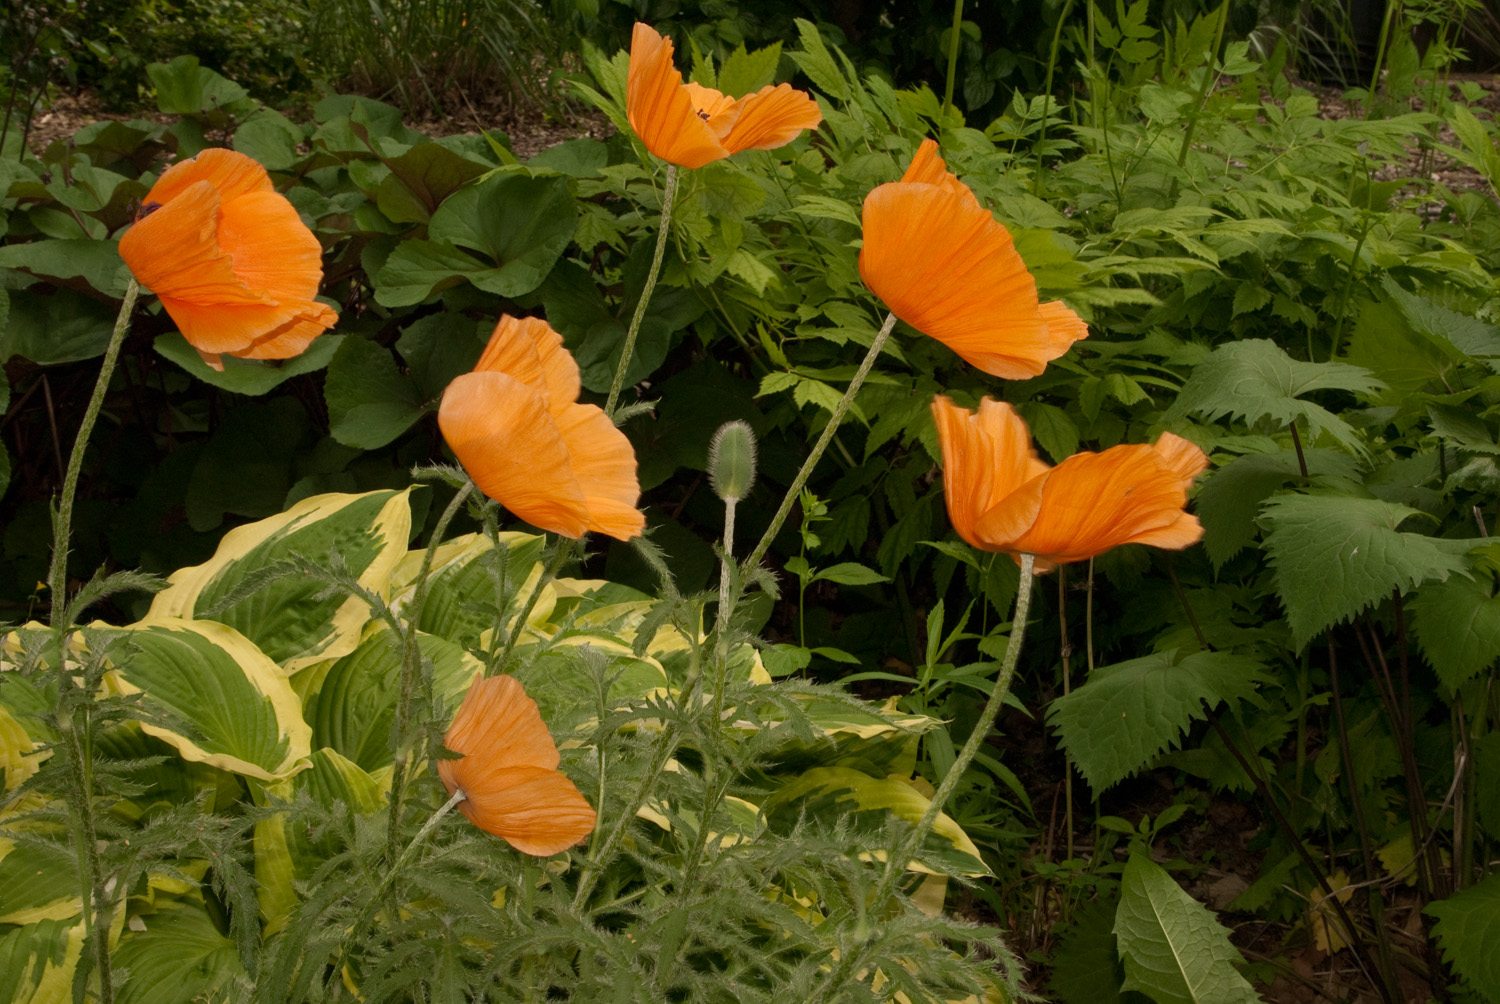 Poppies Blowing in the Wind